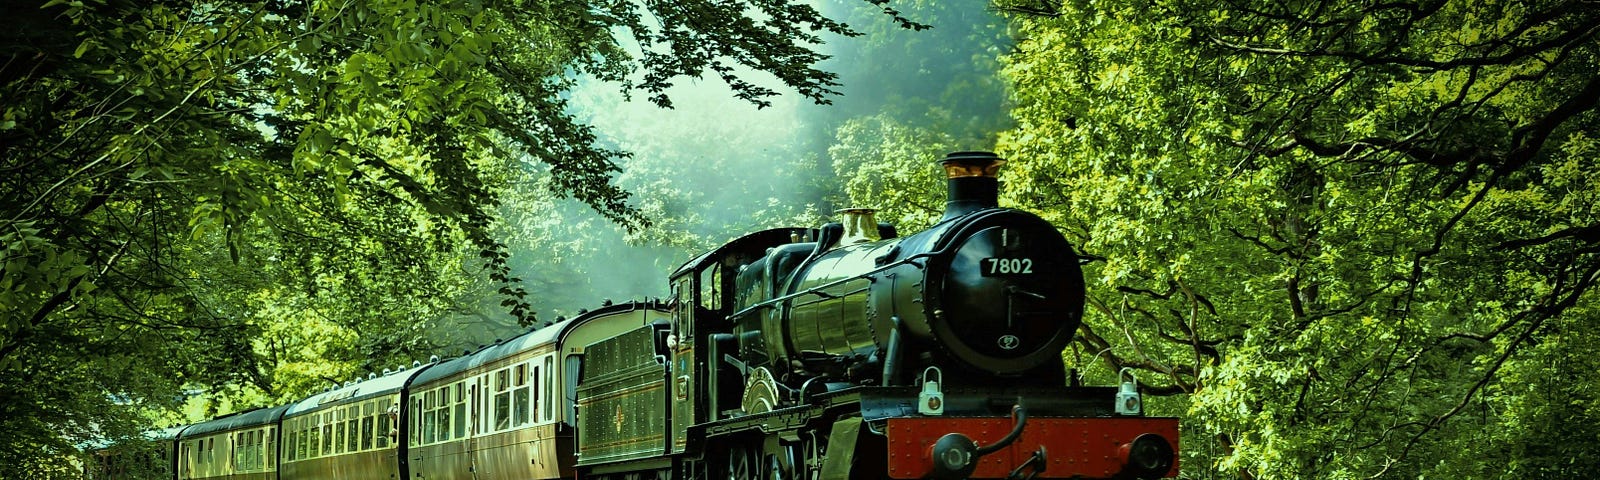 Steam engine and train among trees…